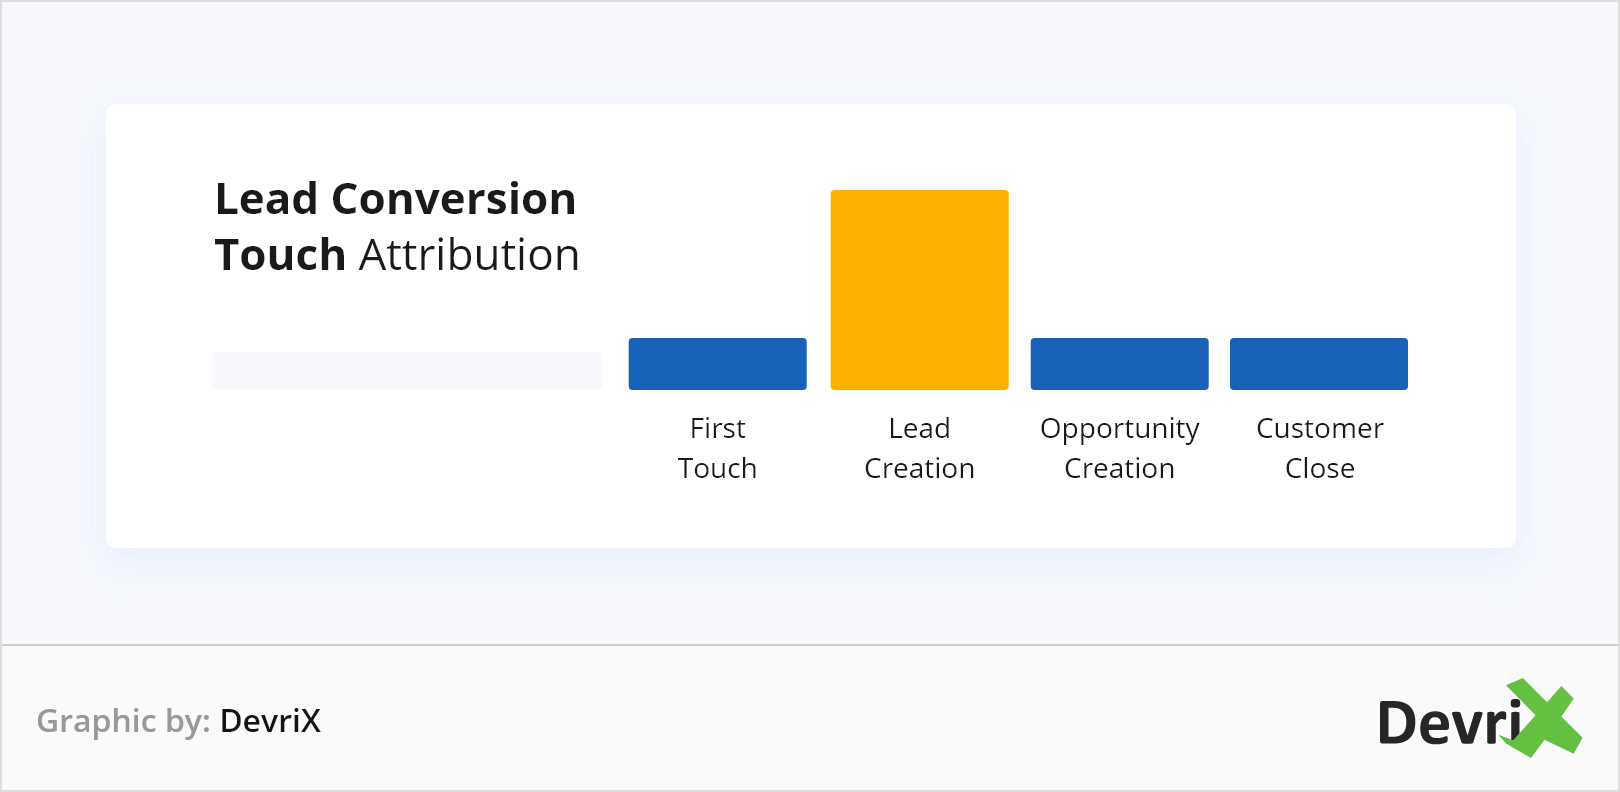 Lead Conversion Touch Attribution